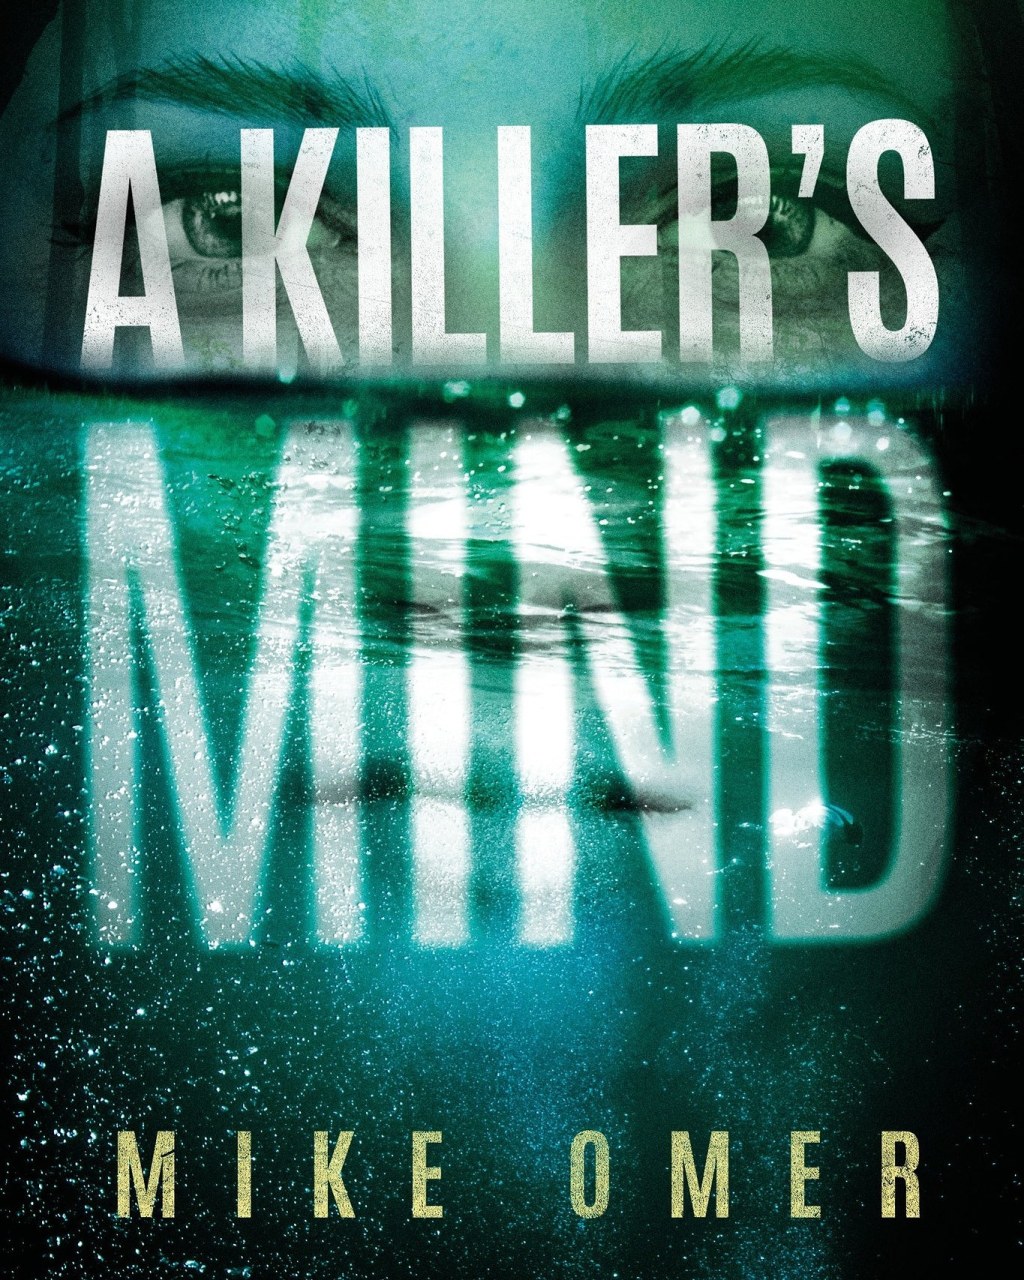 A Killers Mind #BookReview